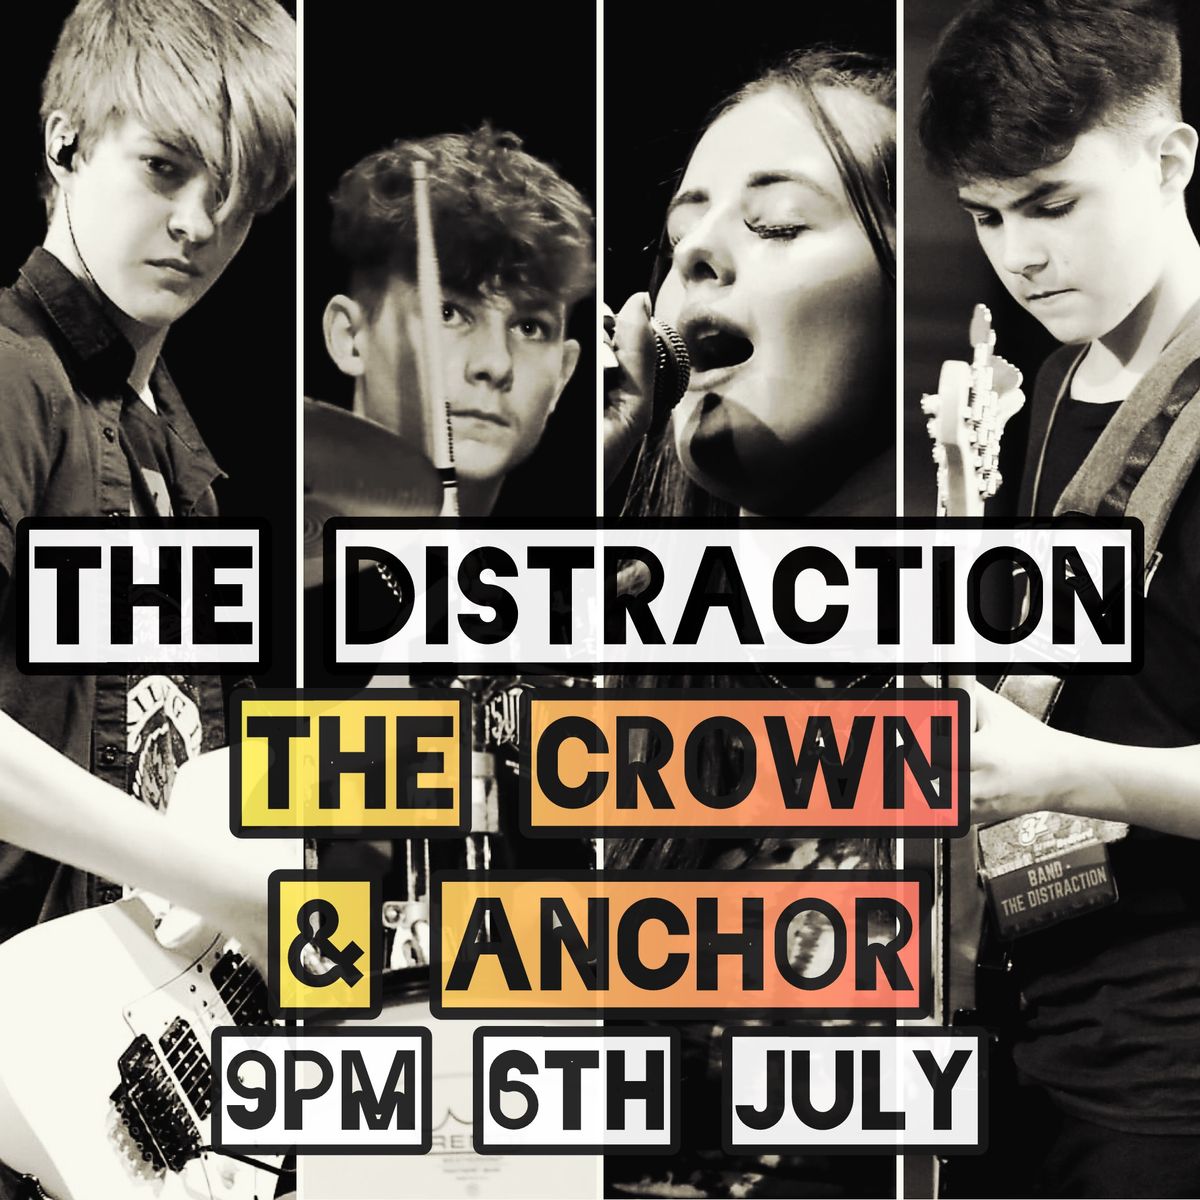 The Distraction @ The Crown & Anchor - Live Music